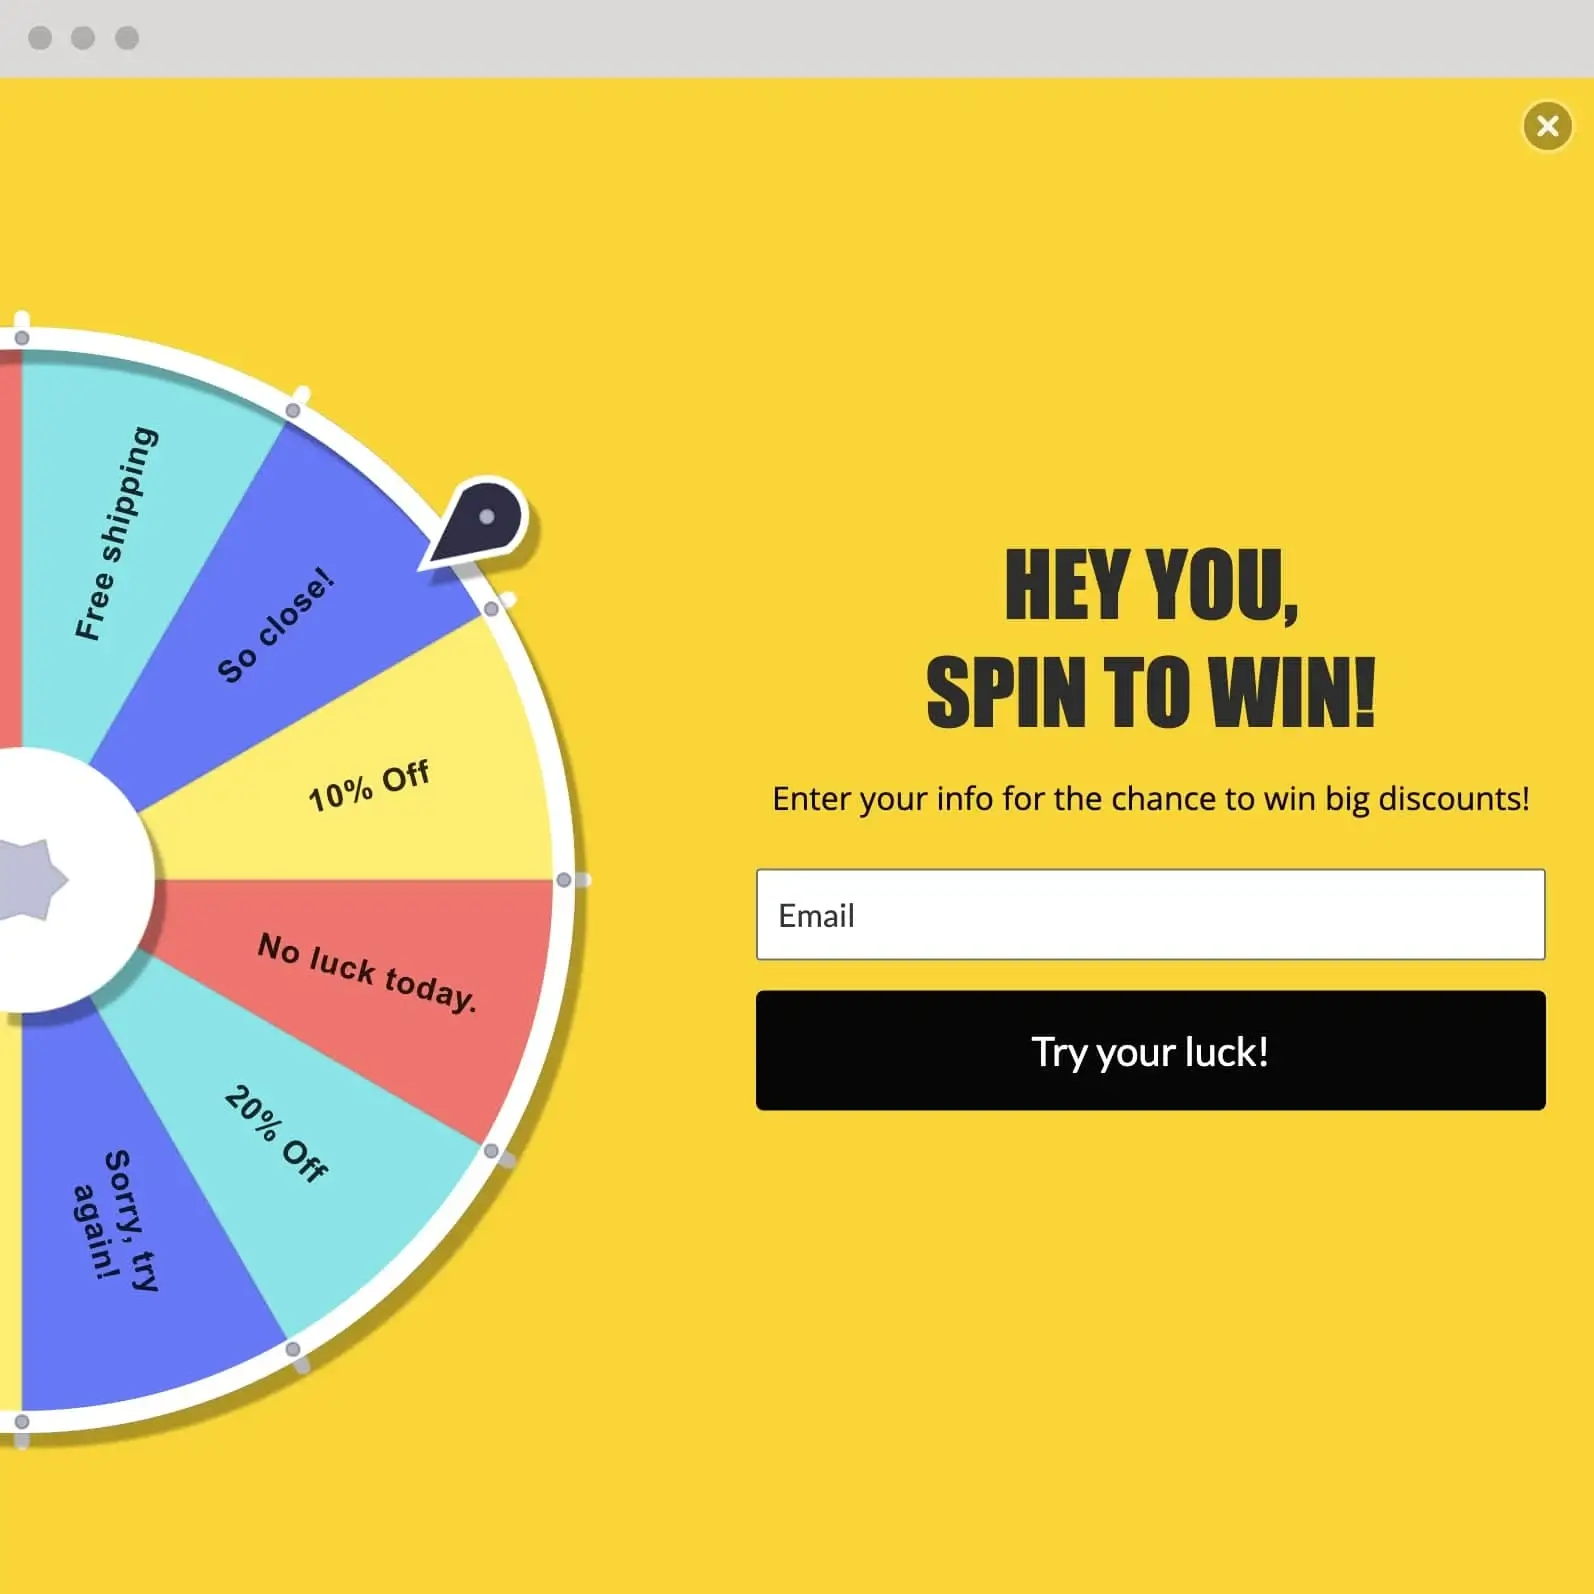 Spin-to-win example by Privy.com